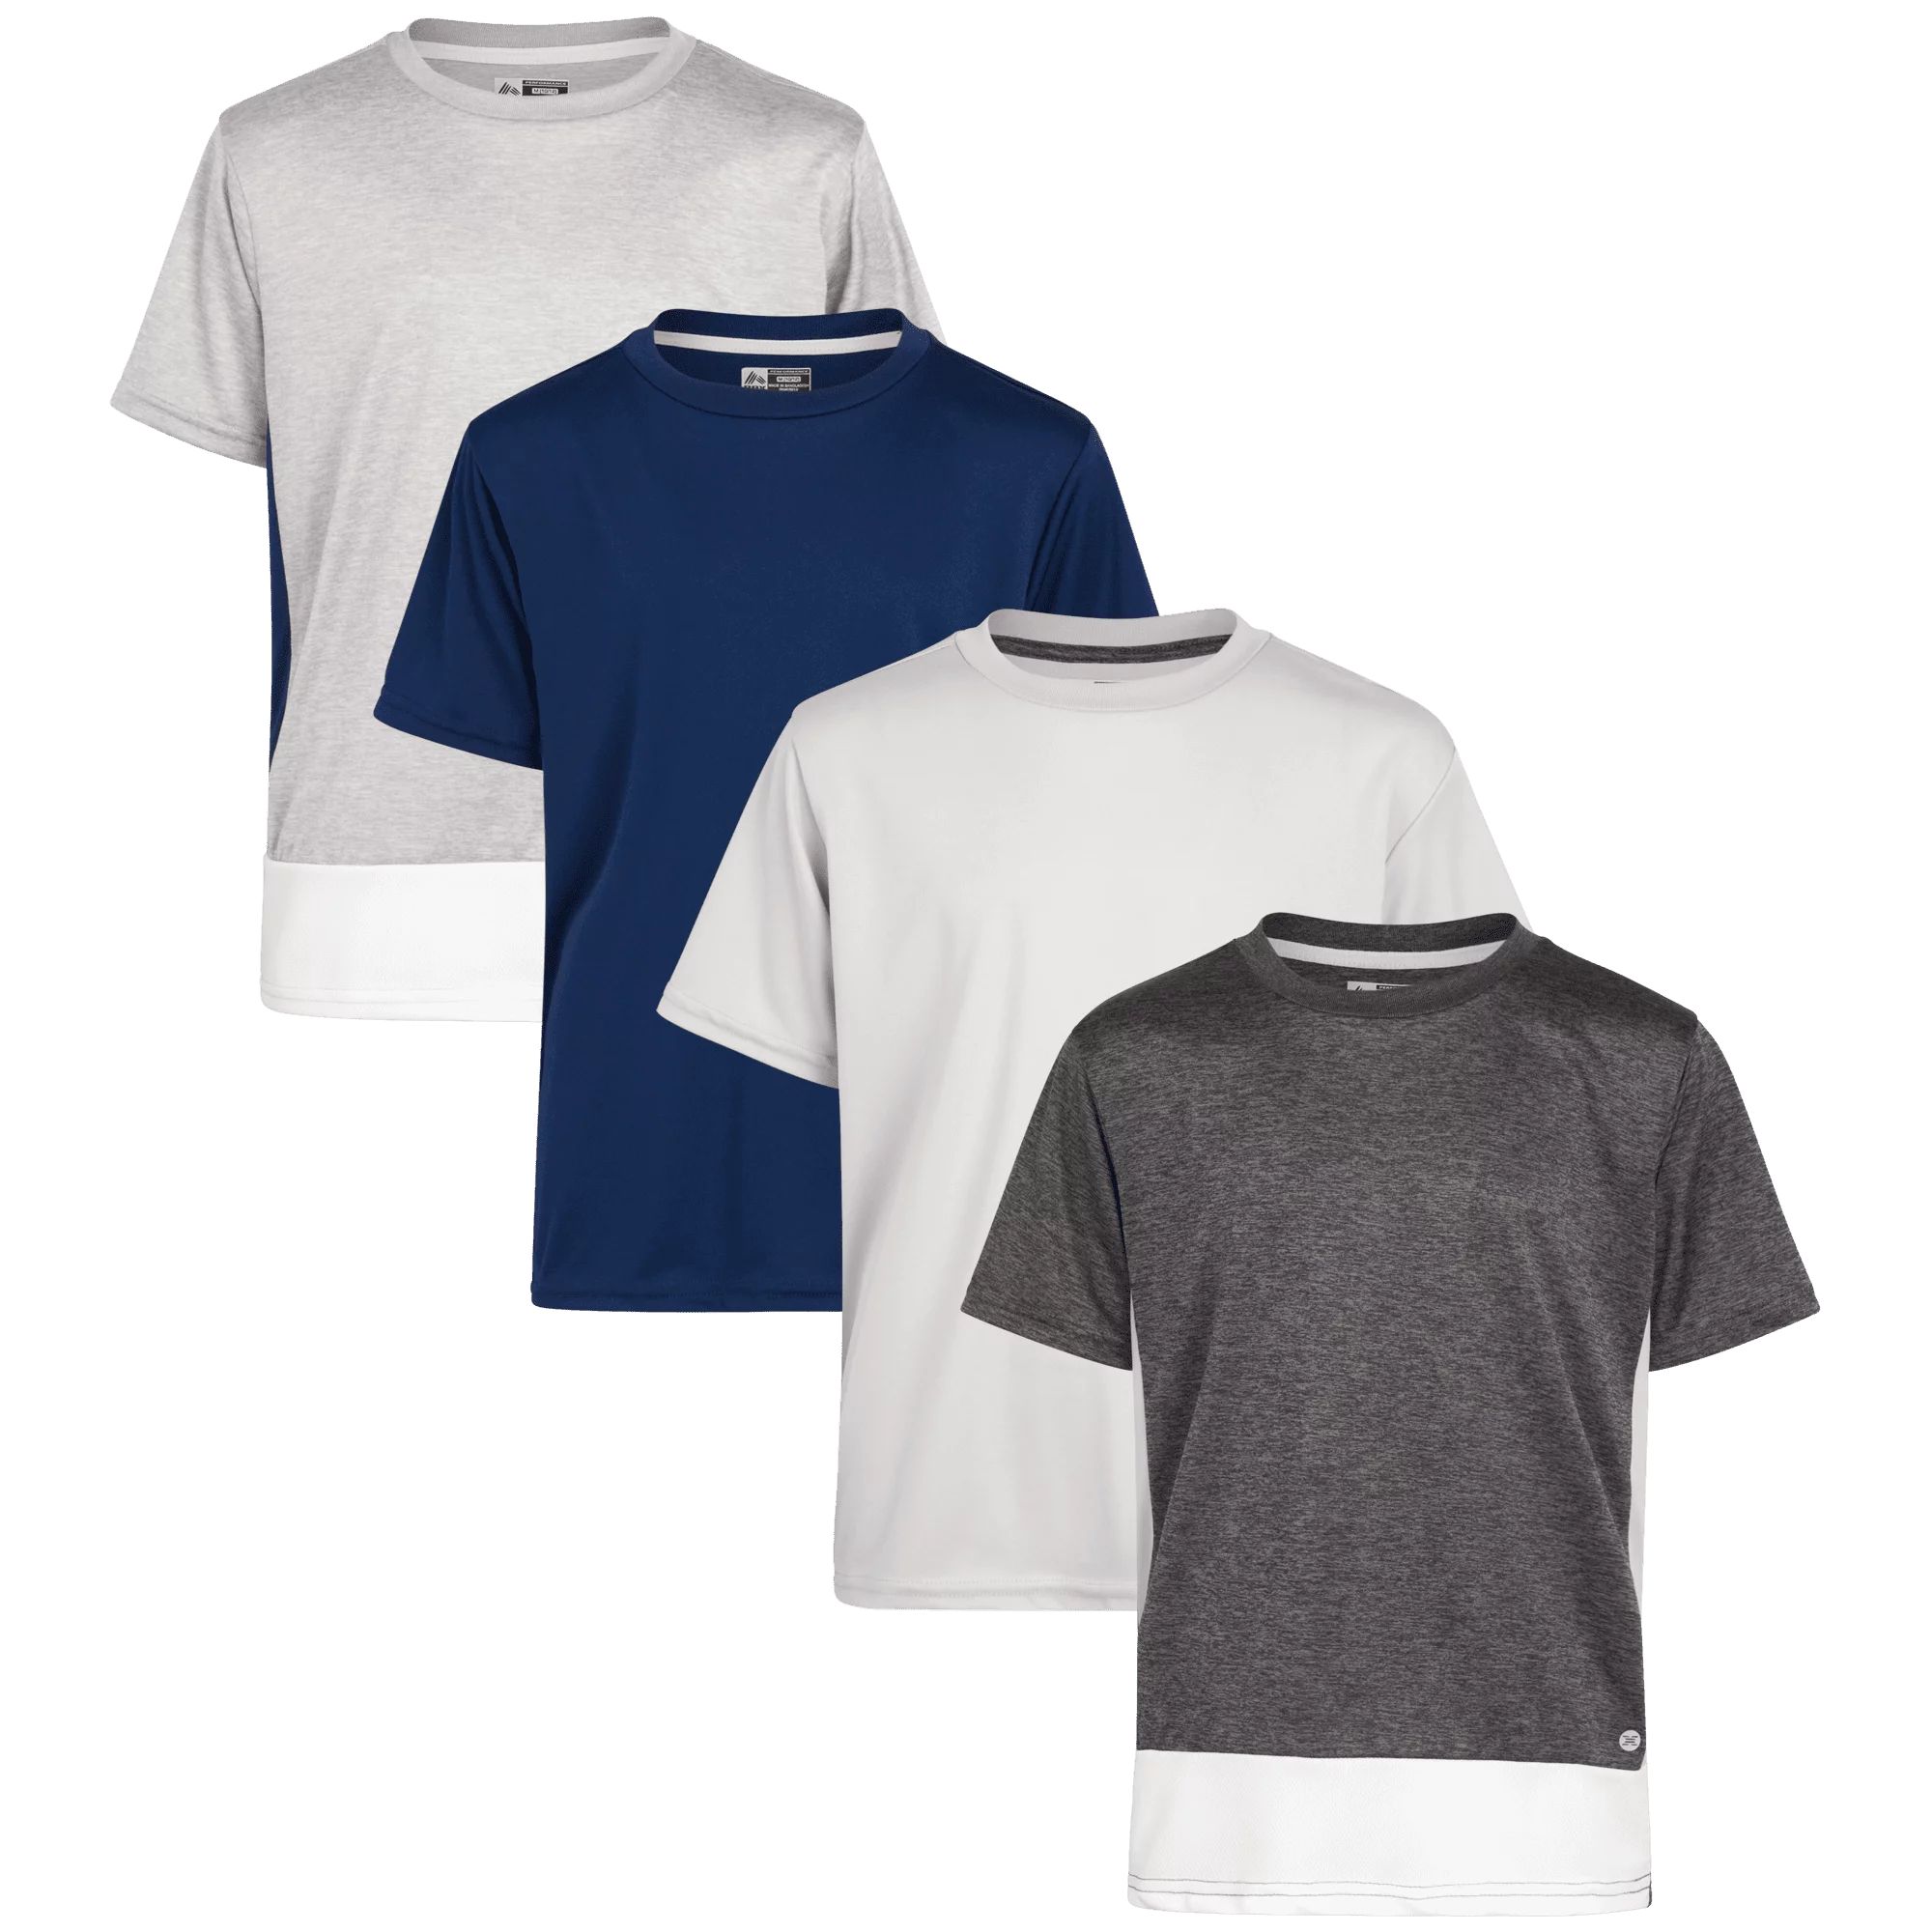 RBX Boys’ Active T-Shirts – 4 Pack Athletic Performance Short Sleeve Sports Tees (Size: 8-16) | Walmart (US)